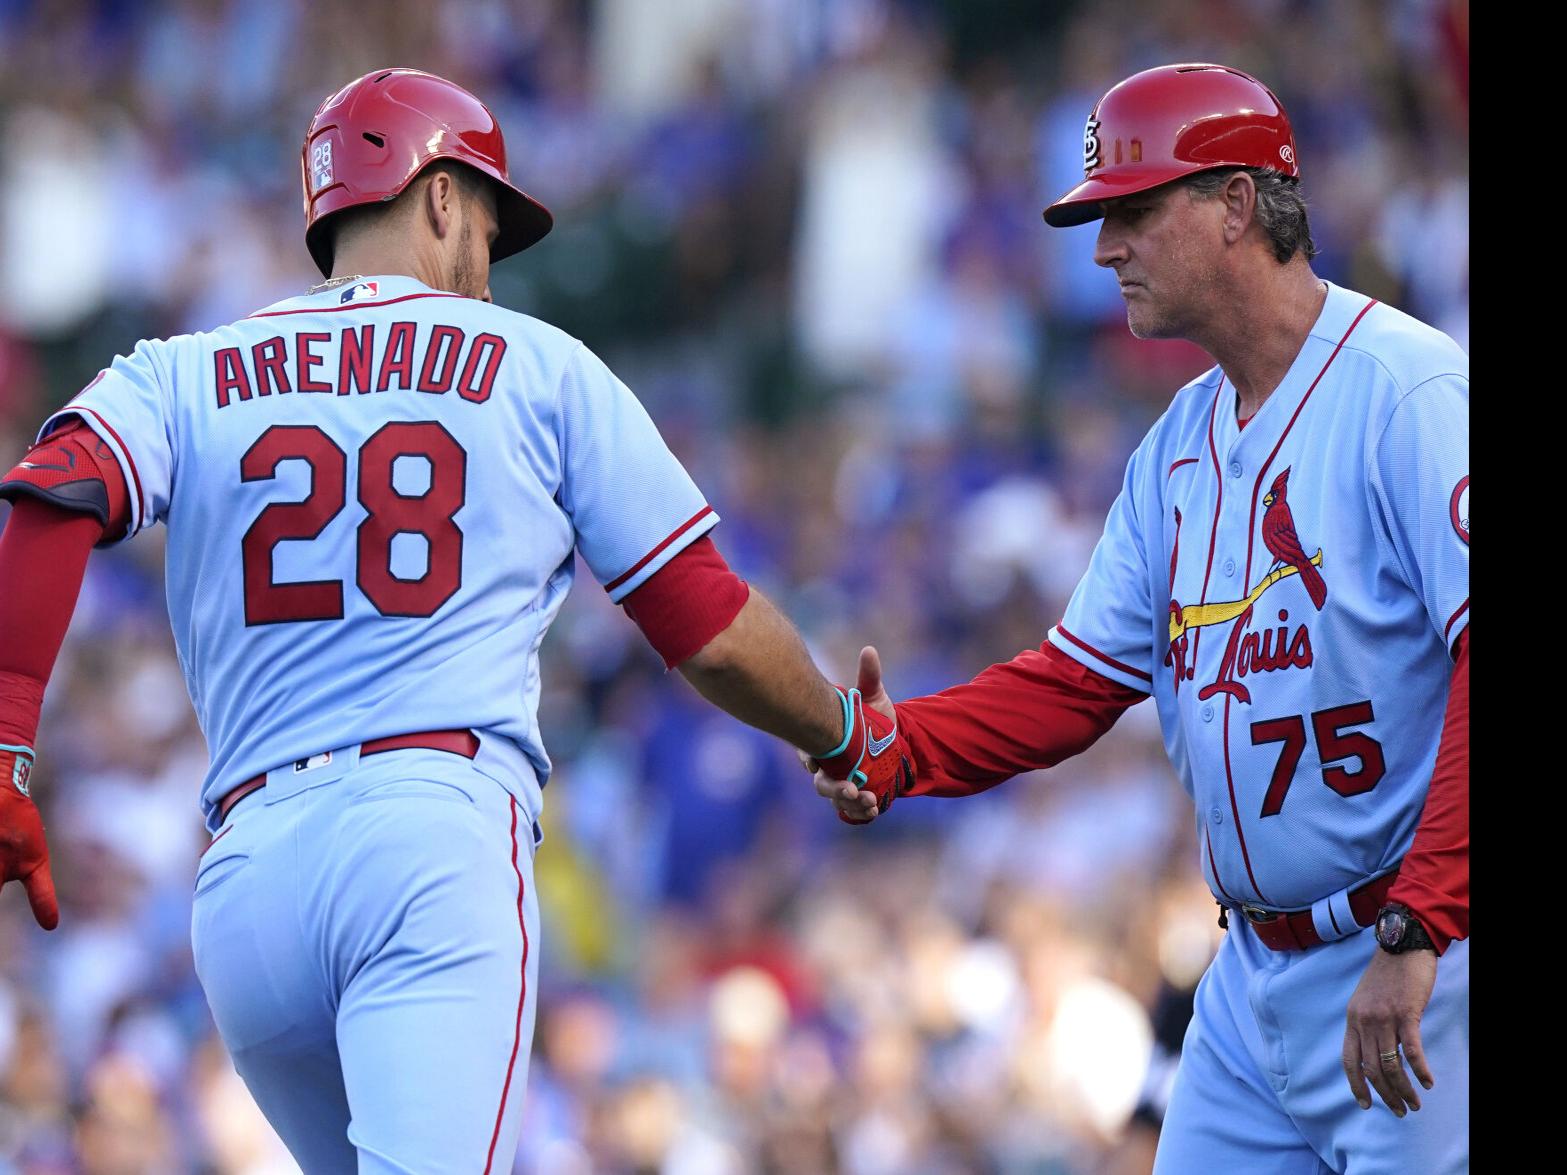 Arenado and DeJong homer, but Cards lose 7-2 to Cubs, Pro Sports